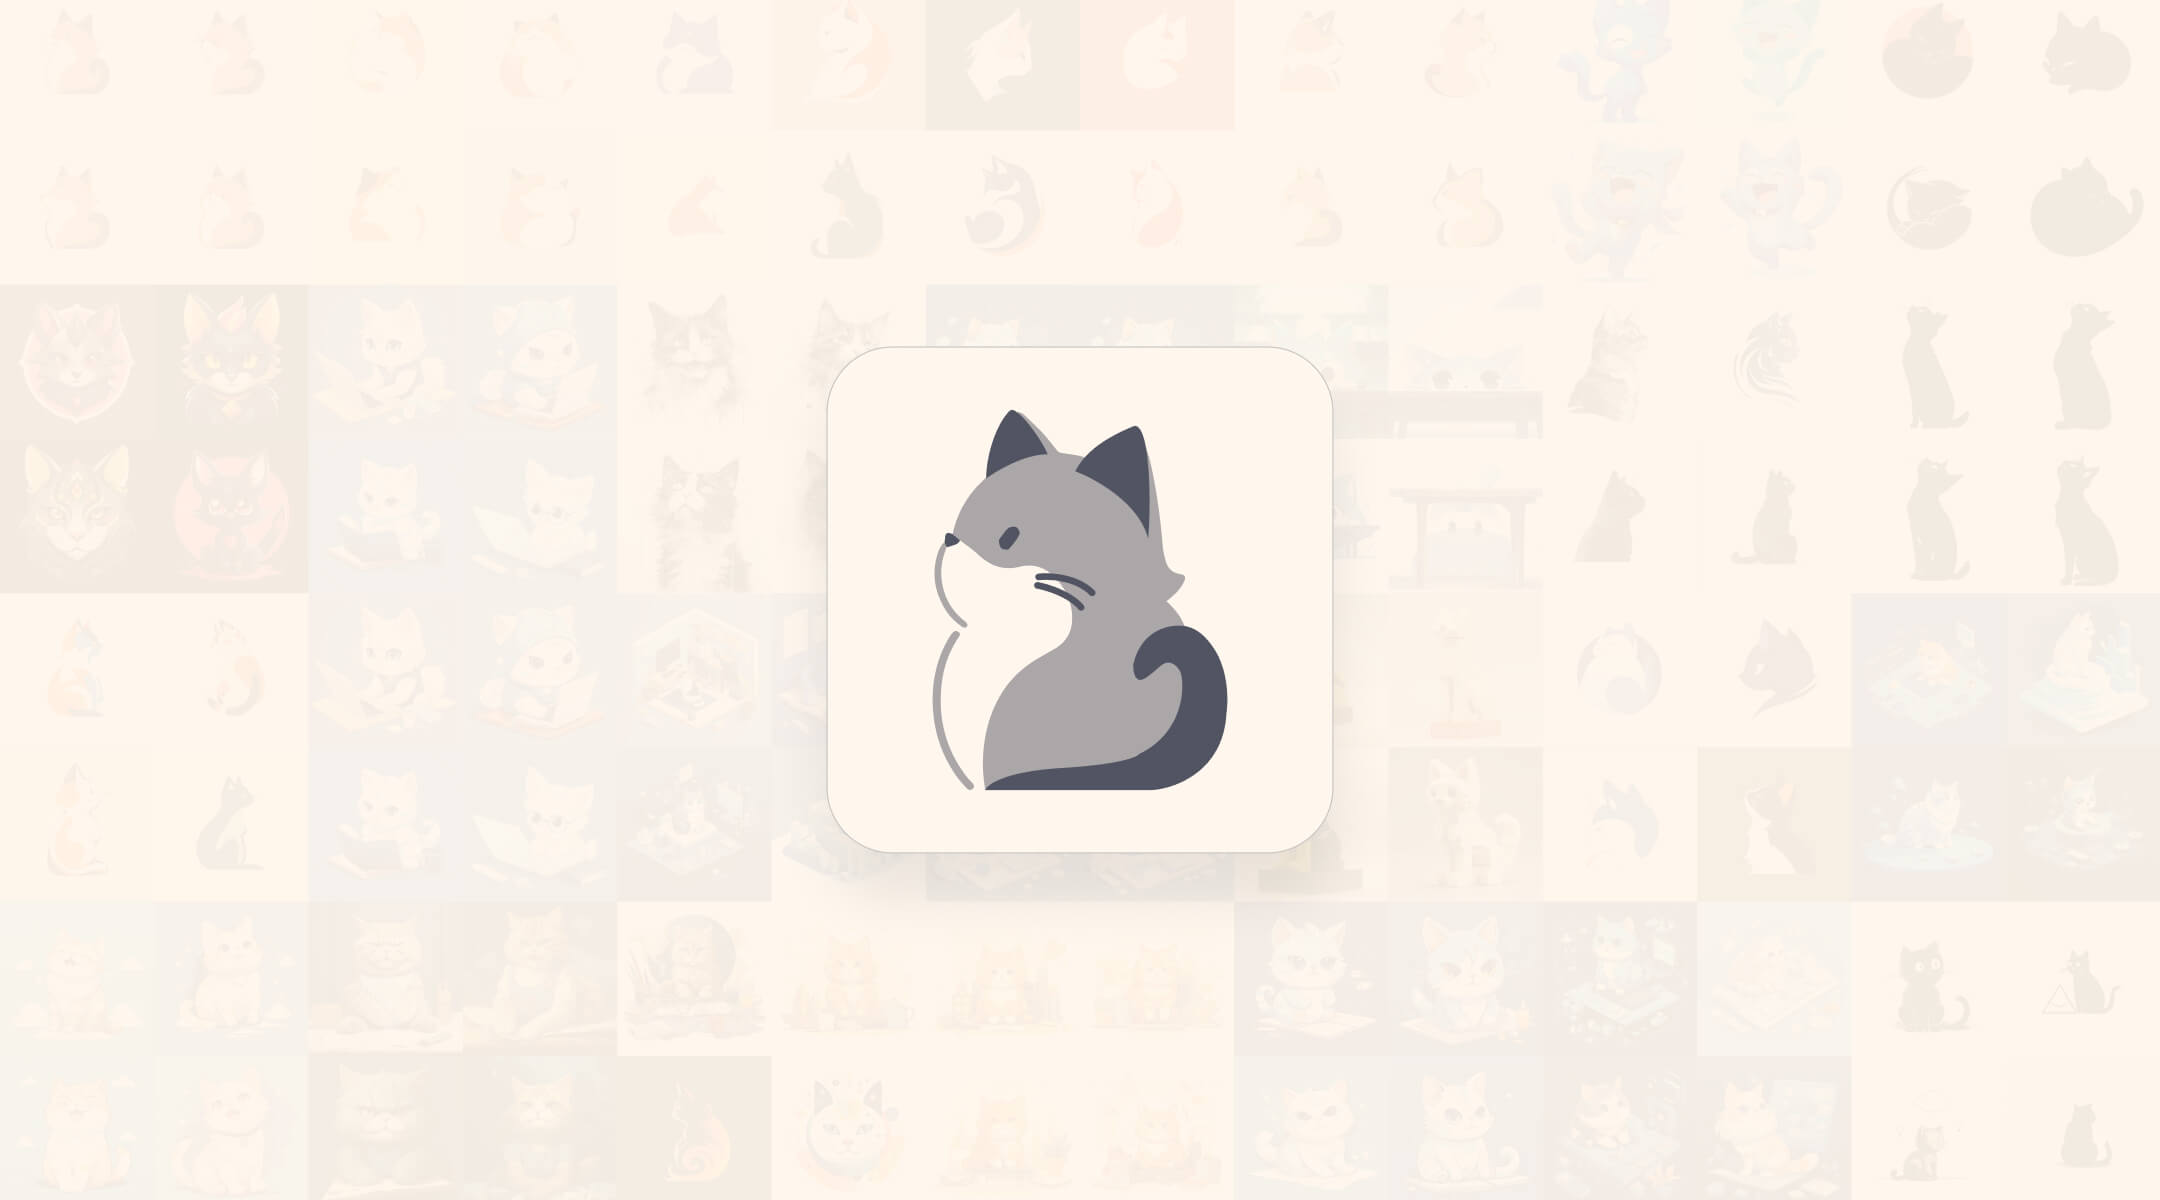 Inko Cat logo on top of a faded background consisting the hundreds of logo iterations